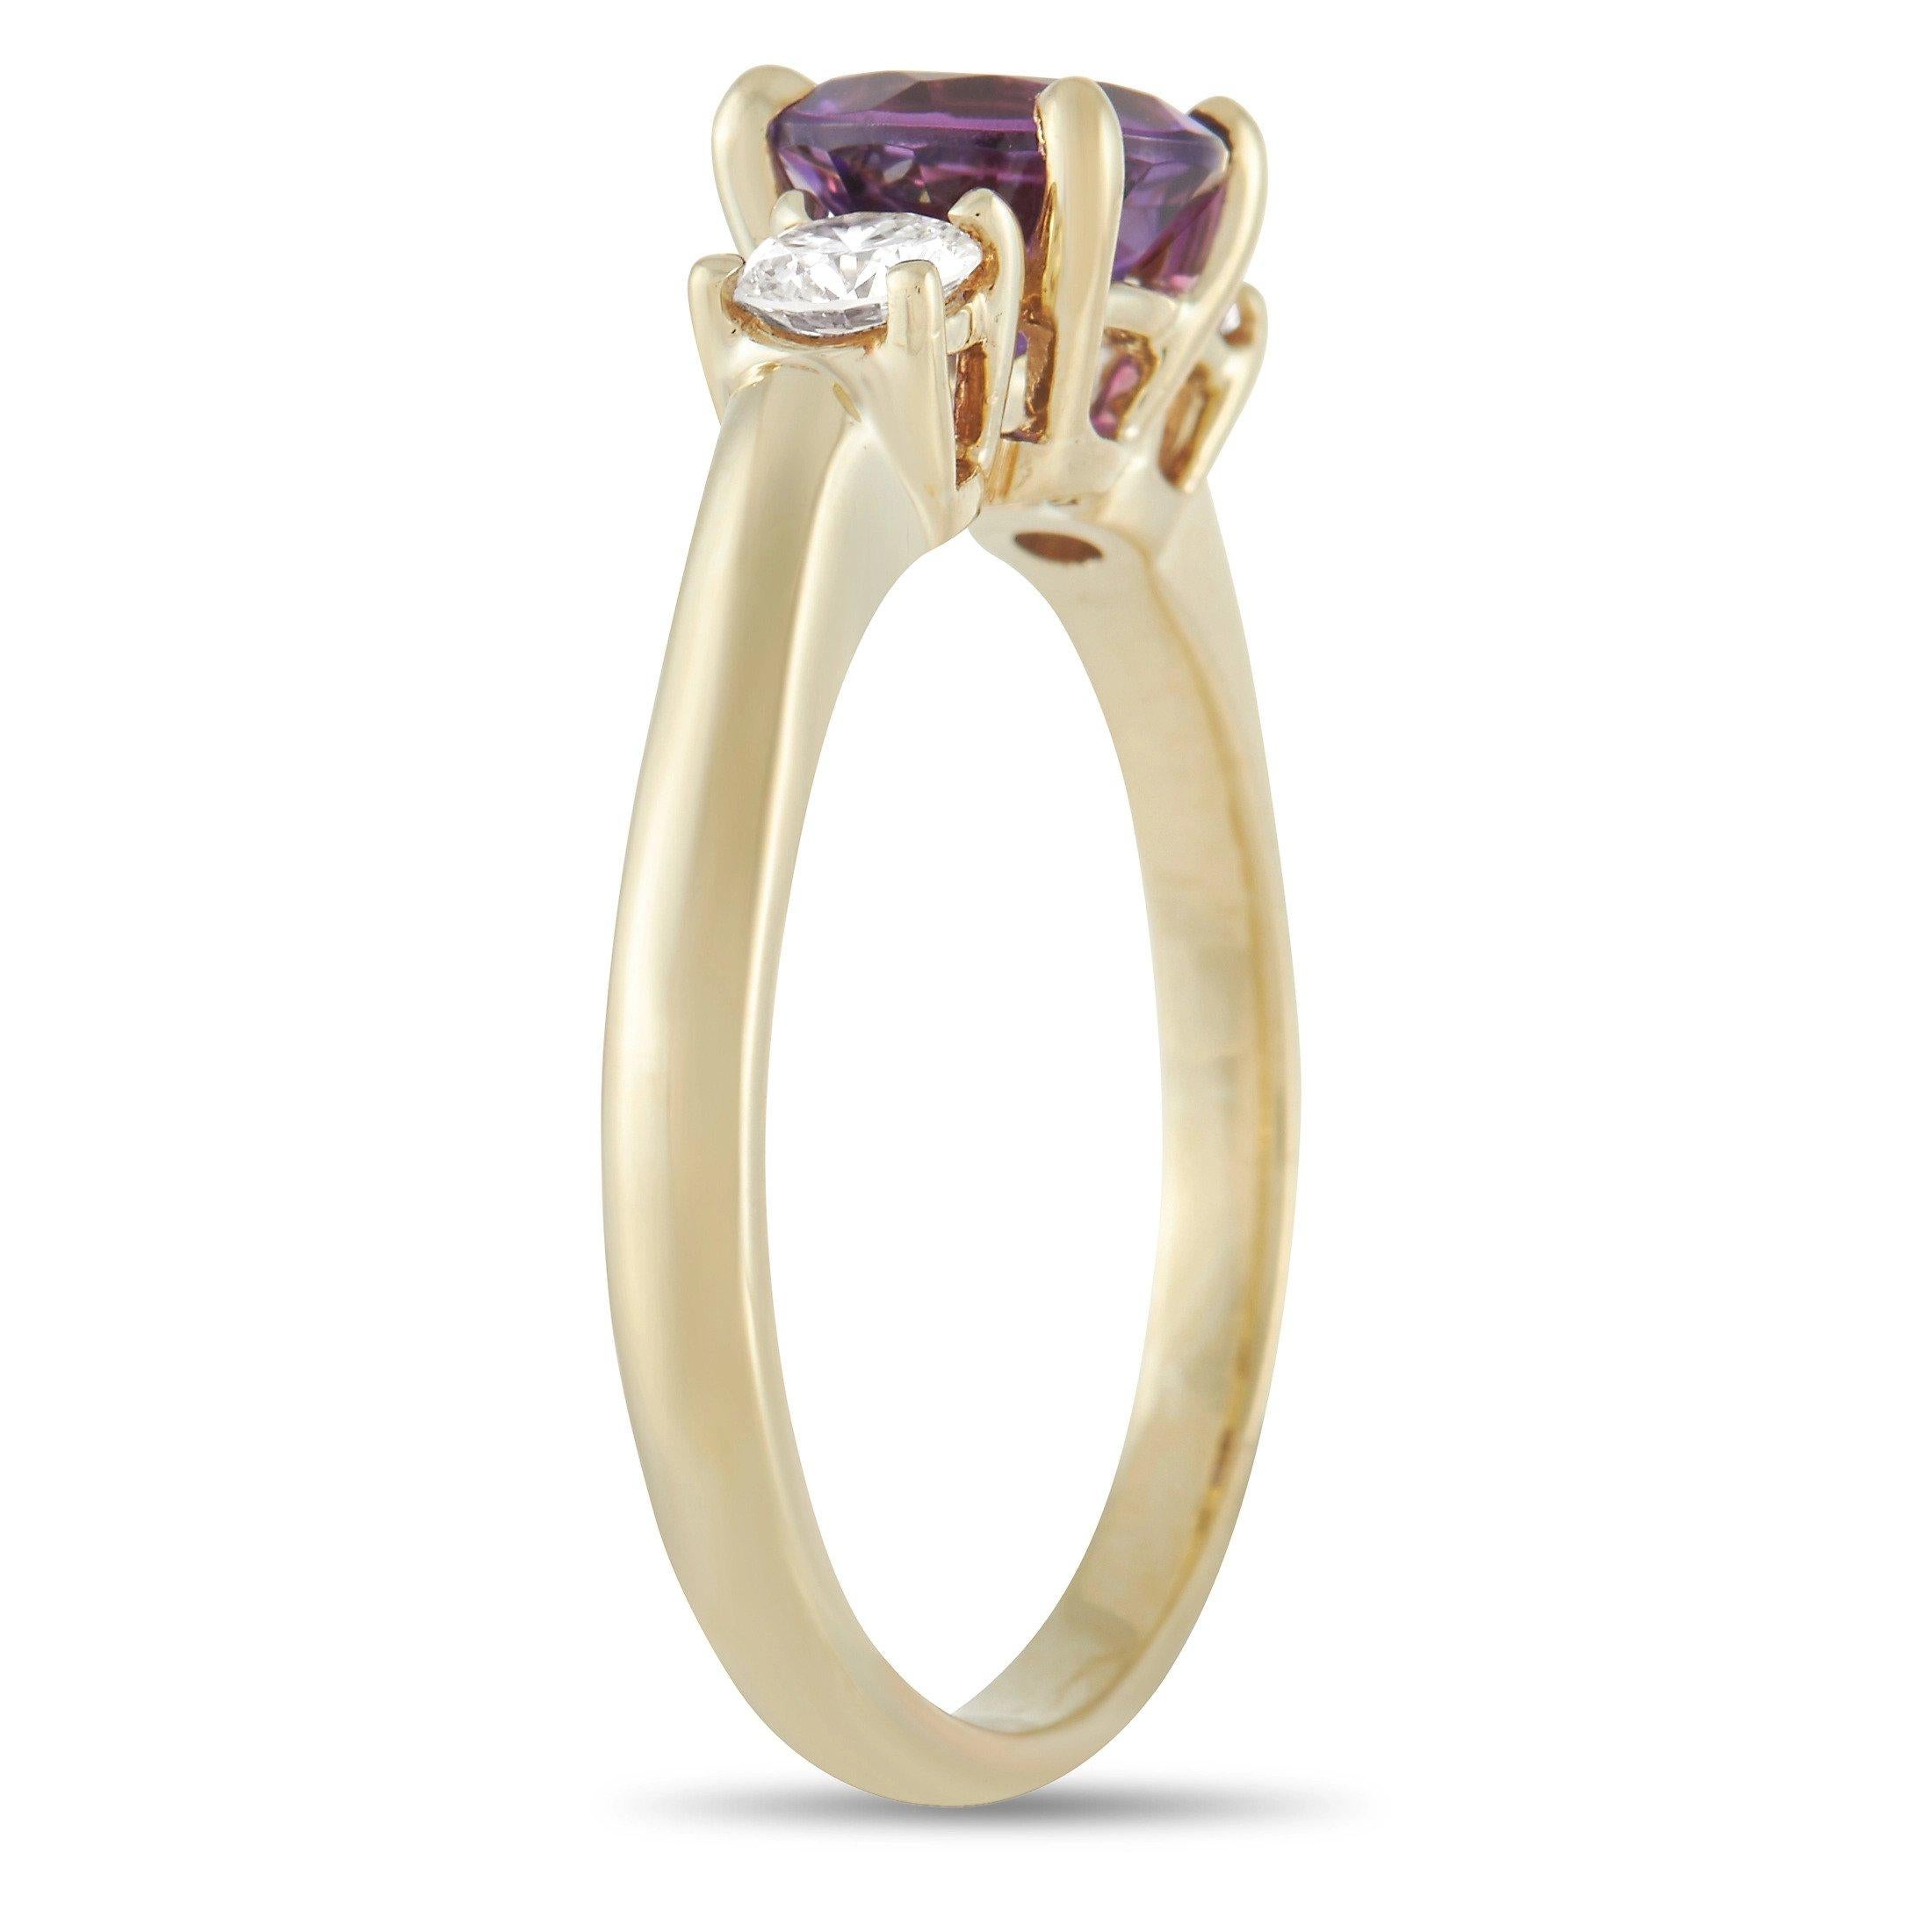 Chic and colorful, this ring from Tiffany & Co. is the perfect addition to any collection. Made from opulent 18K Yellow Gold it features a dainty 2mm band and a 5mm top height. At the center, you’ll find a deep purple amethyst gemstone surrounded by